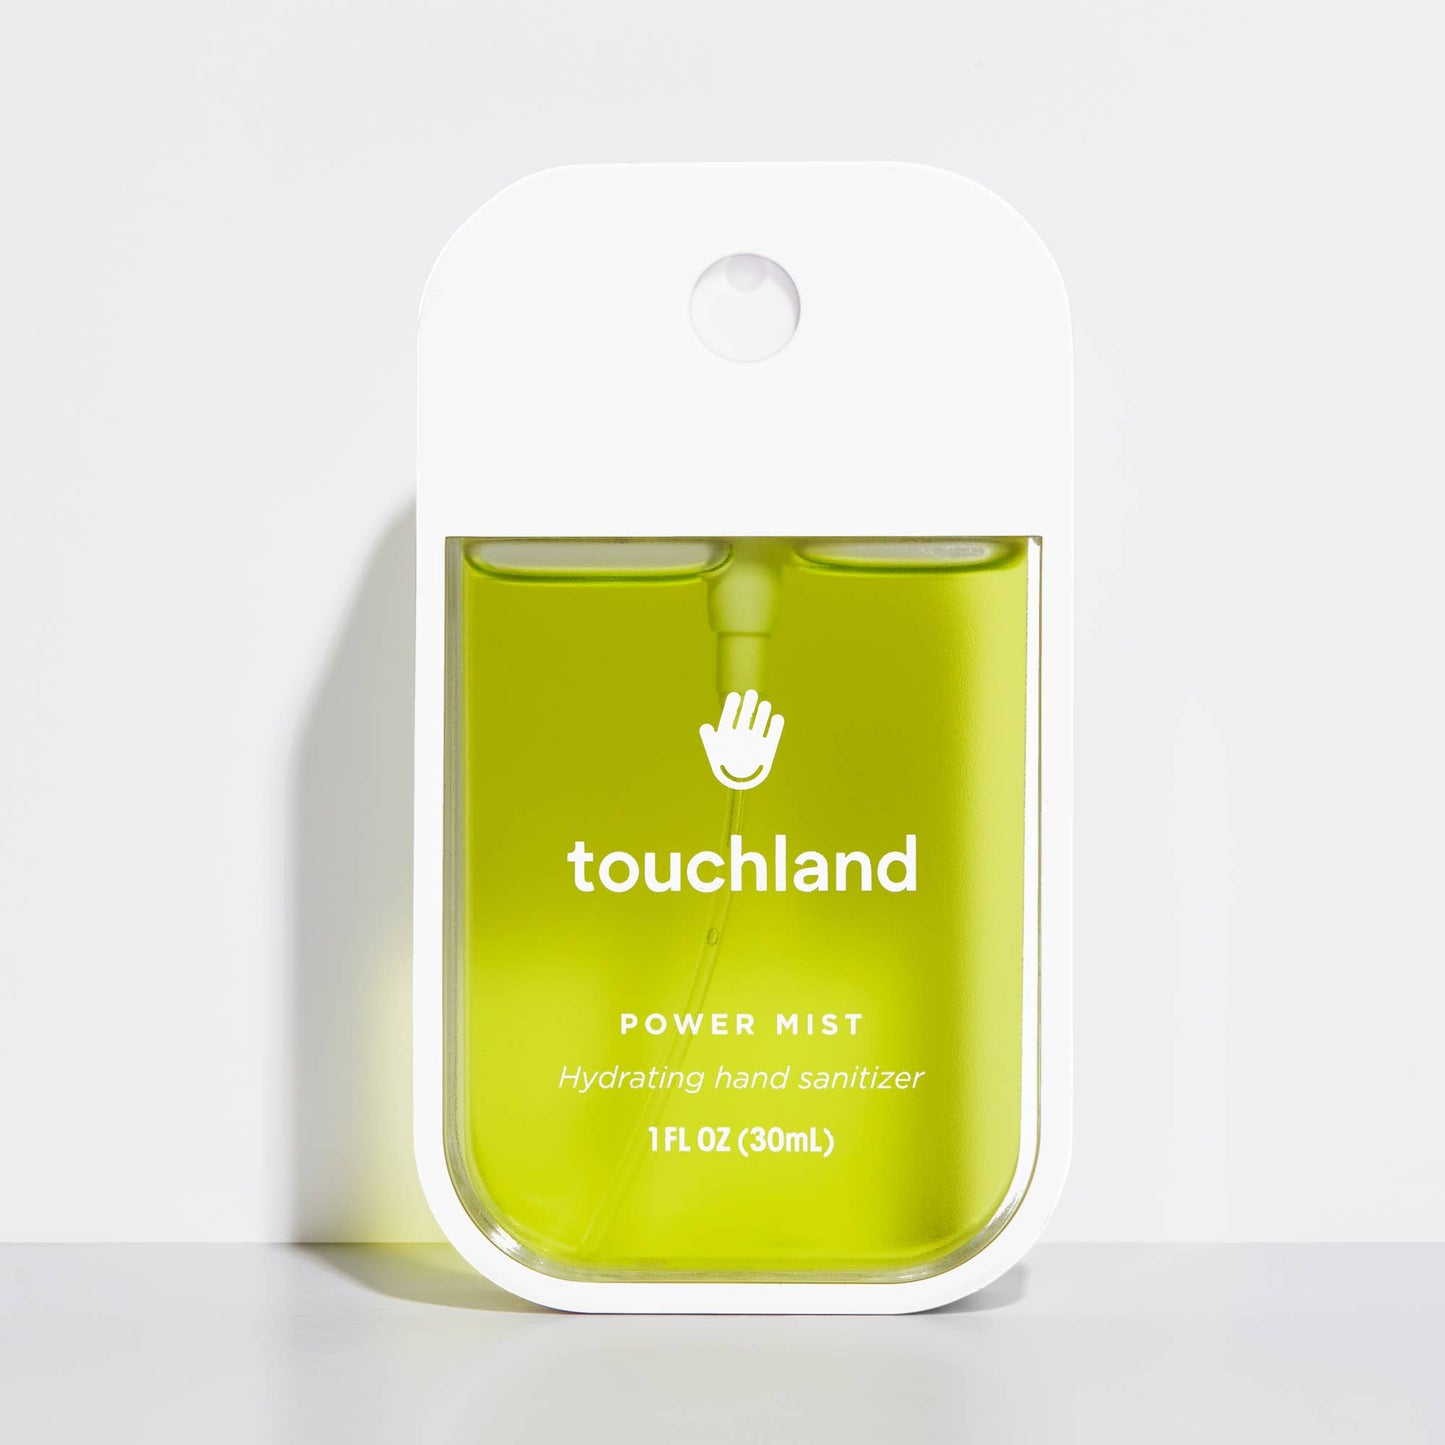 Touchland Power Mist Hand Sanitizer | Aloe You-Touchland--The Twisted Chandelier